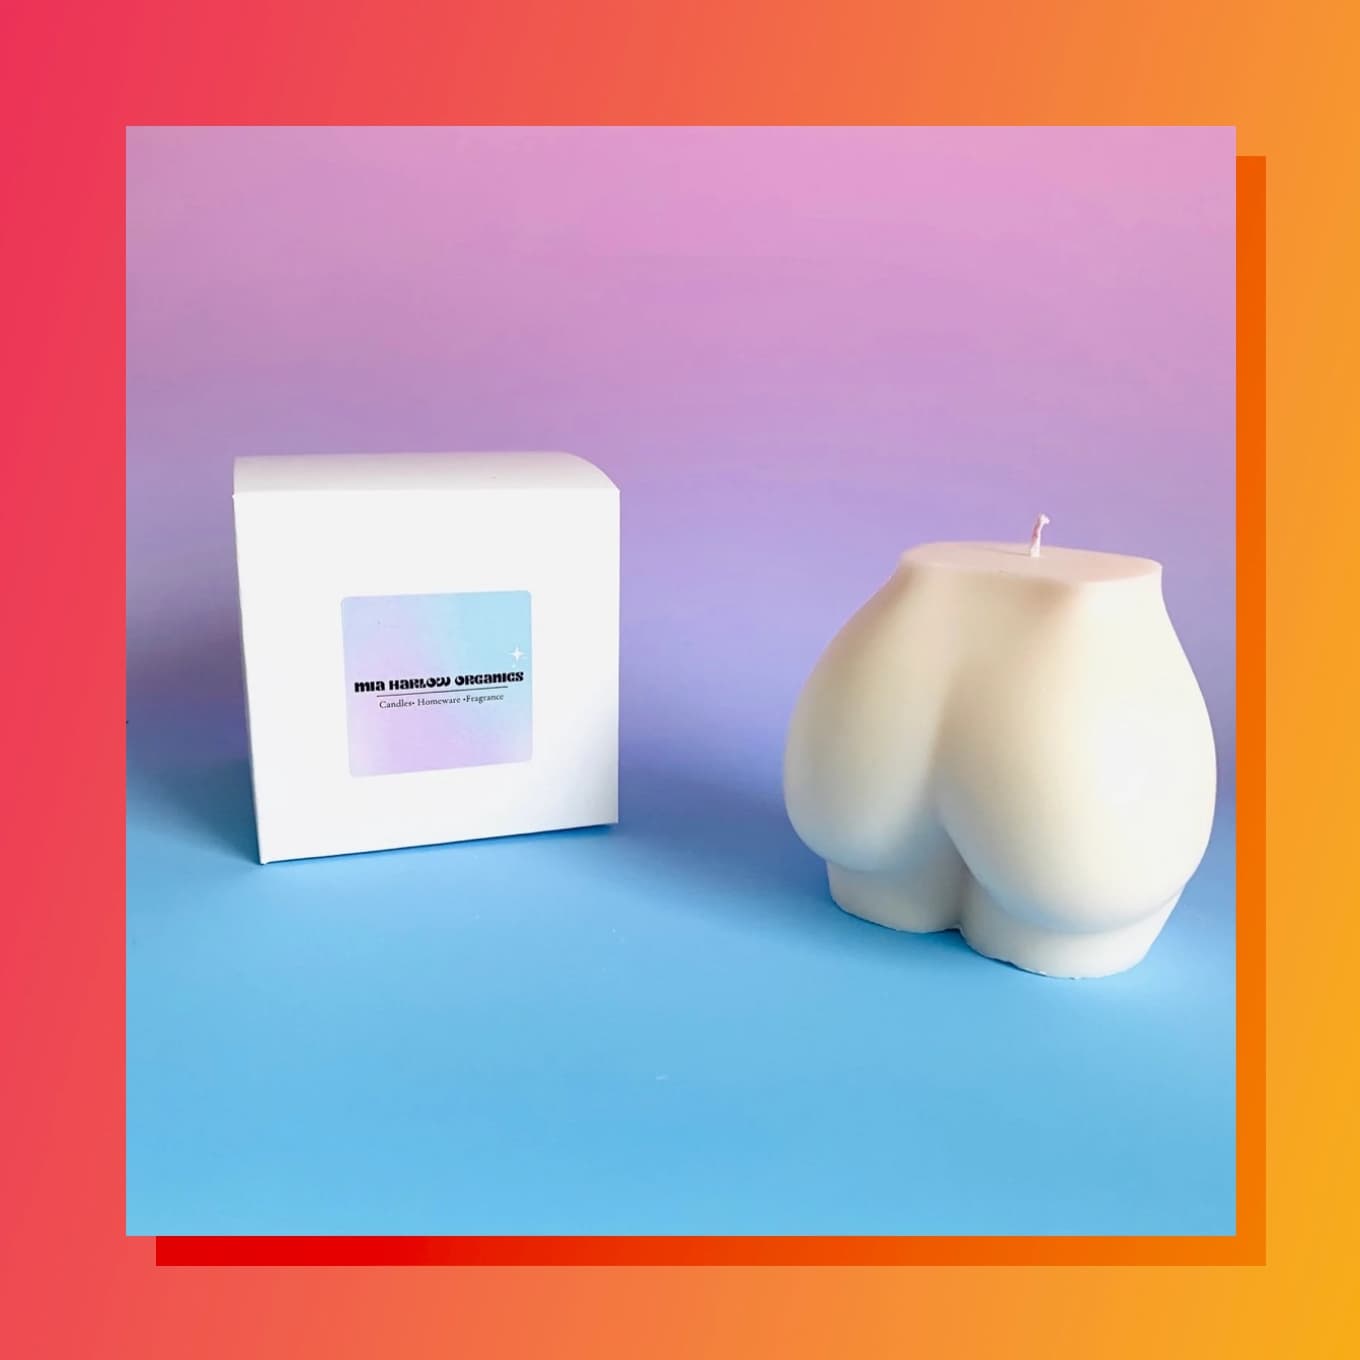 Sculptural candle shaped like a butt